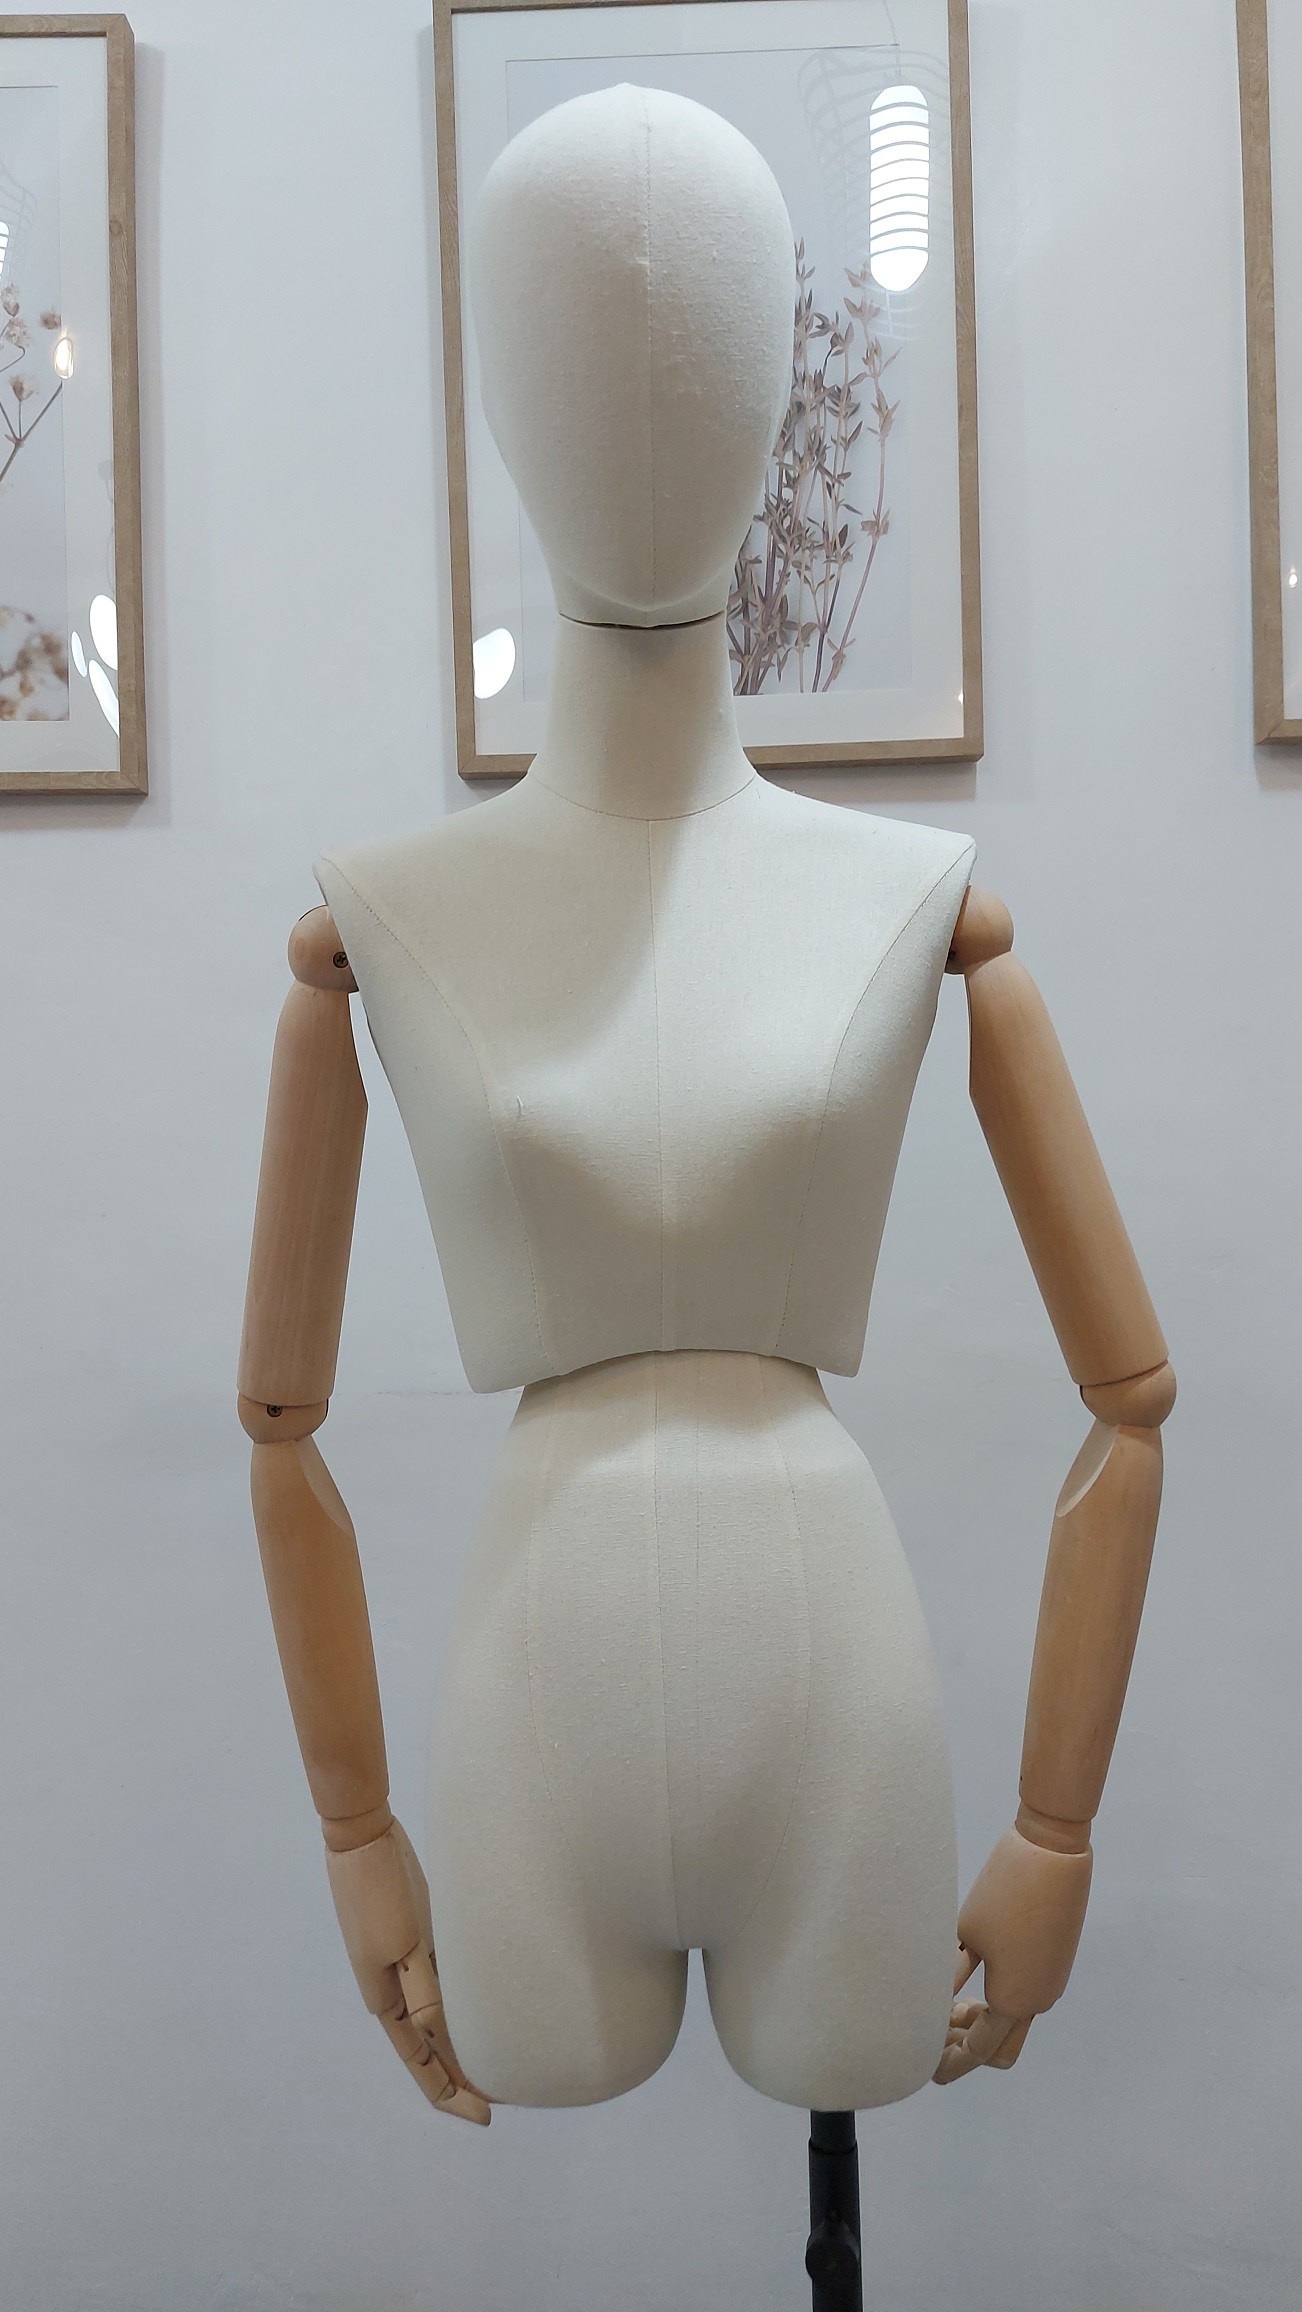 Dress Form Half Body Female Model Torso Iron Base With Wooden Arms For ...